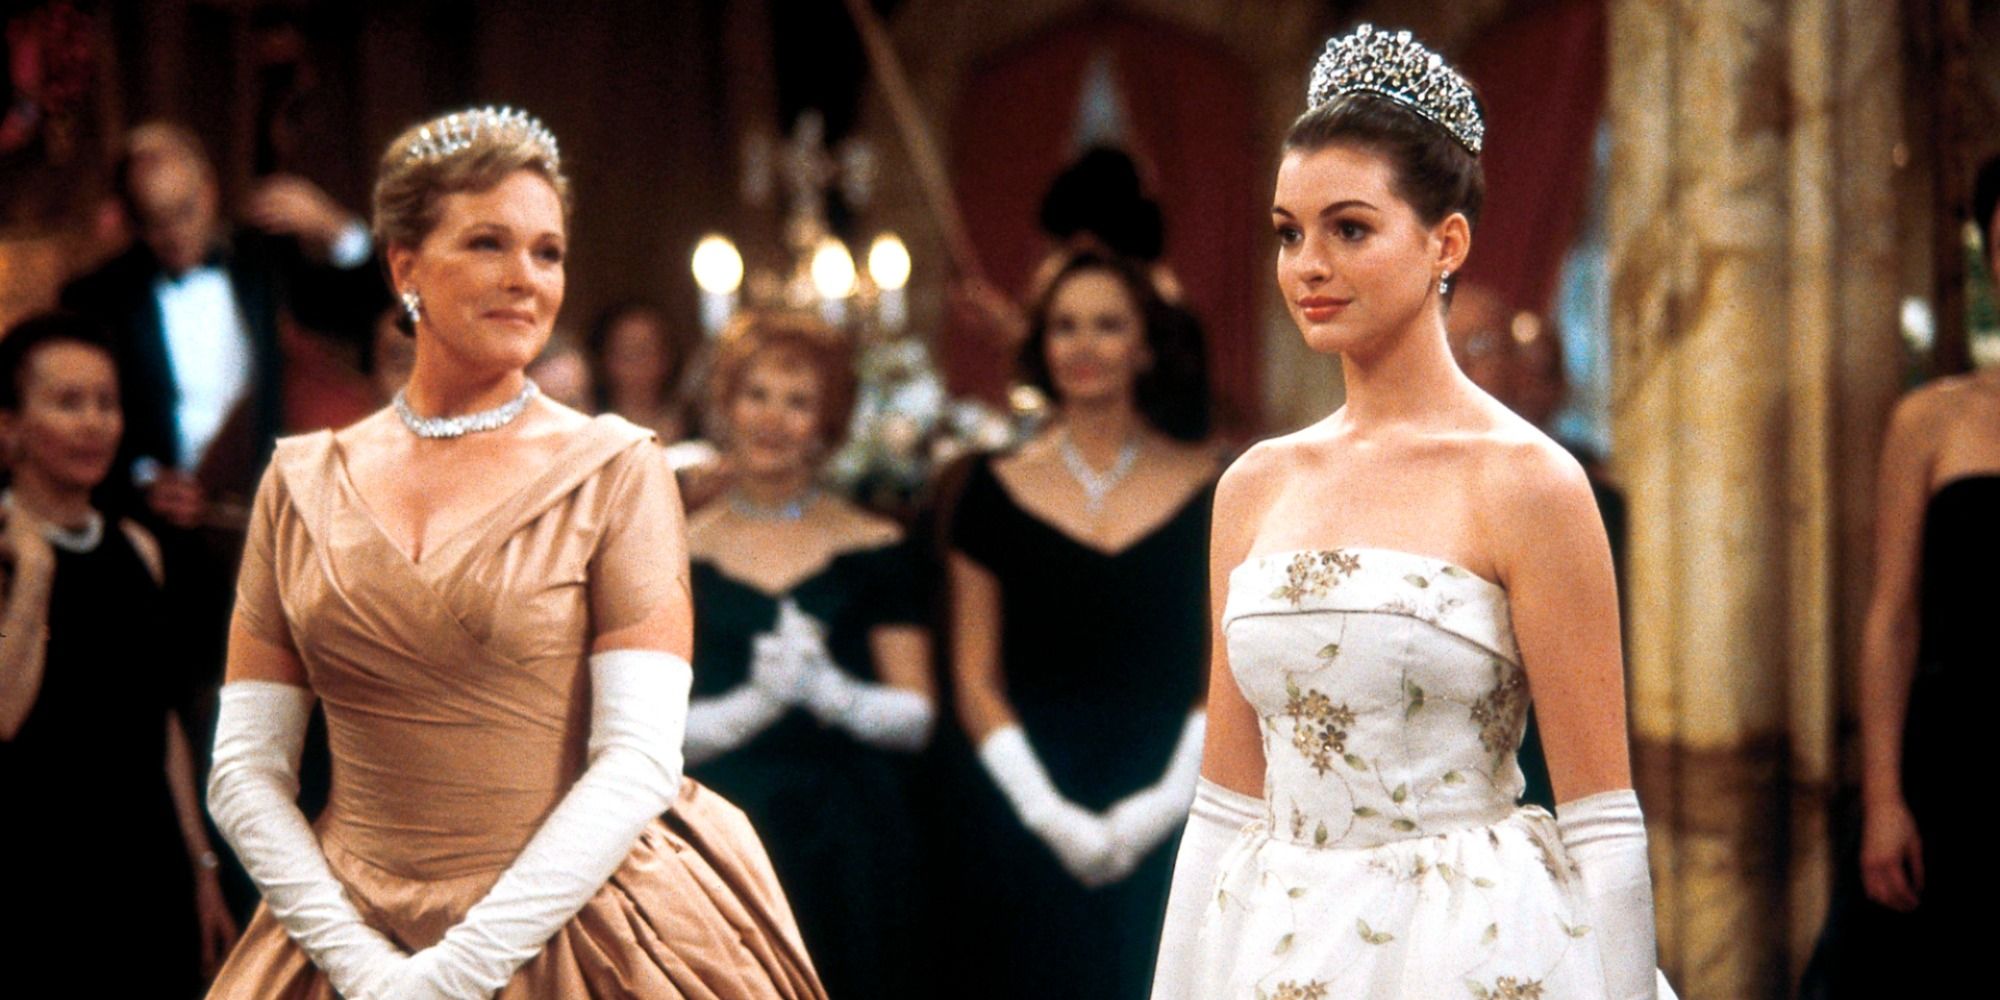 Julie Andrews and Anne Hathaway in ballgowns during a royal ceremony